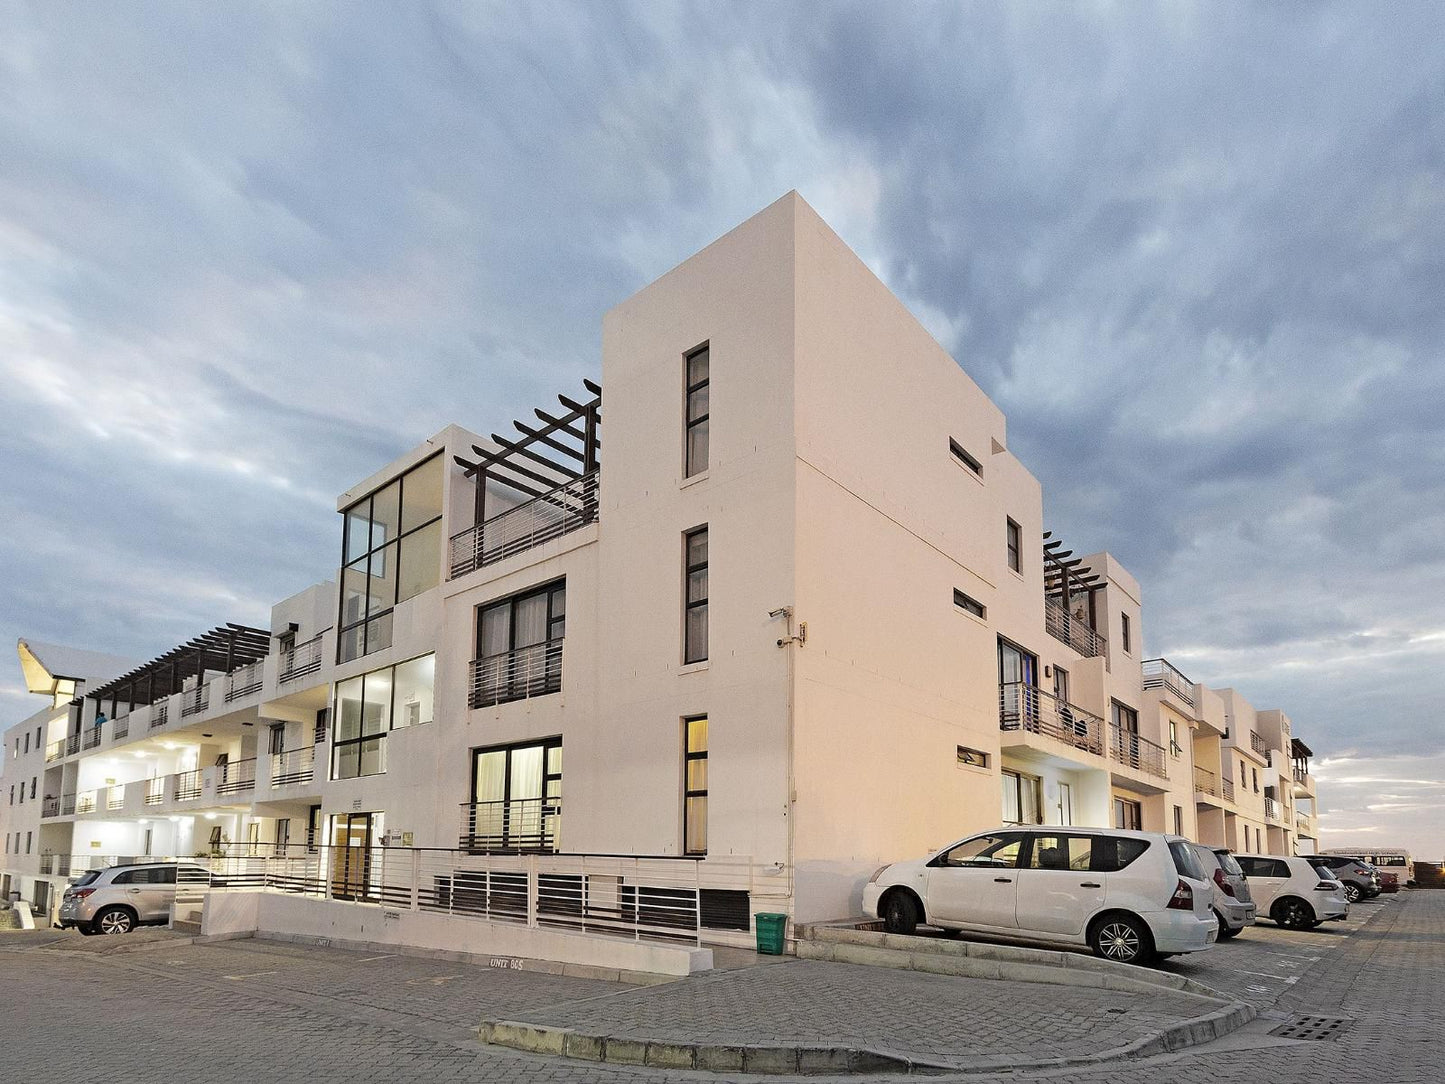 Azure 11 By Hostagents Big Bay Blouberg Western Cape South Africa Building, Architecture, Facade, House, Car, Vehicle